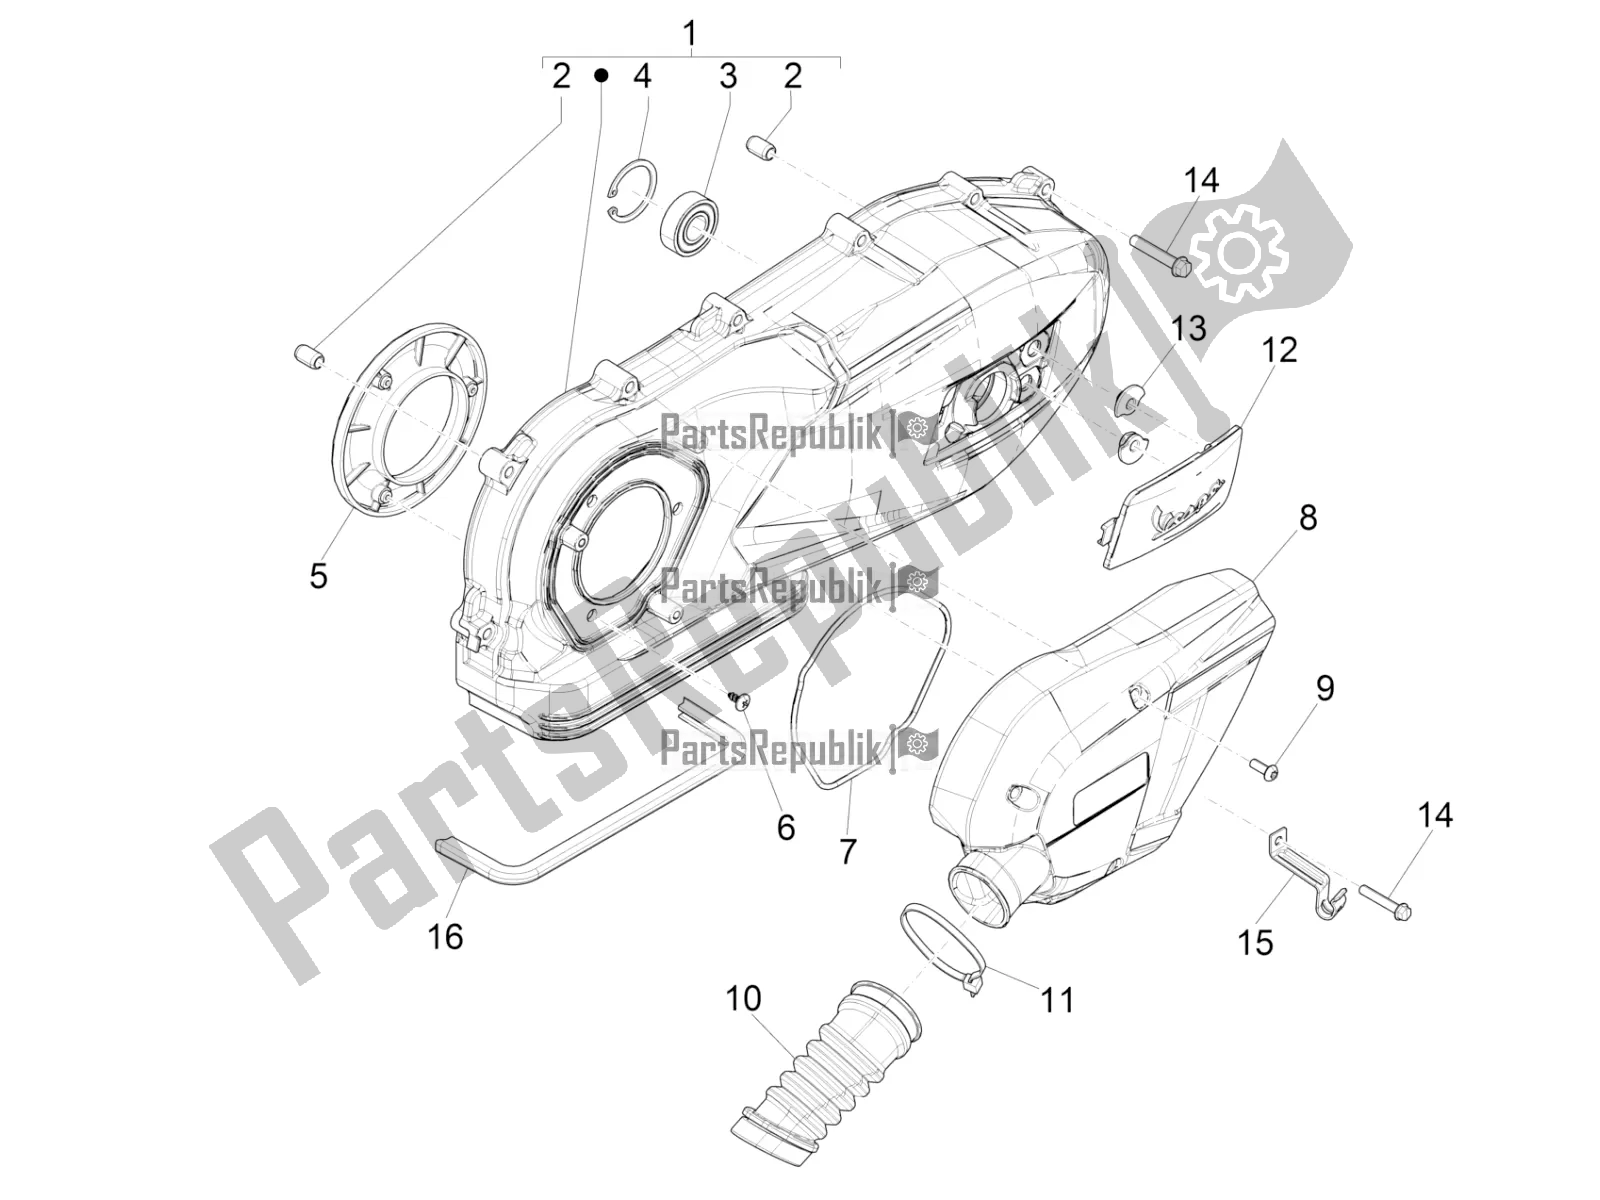 All parts for the Crankcase Cover - Crankcase Cooling of the Vespa LX 125 Iget 2019